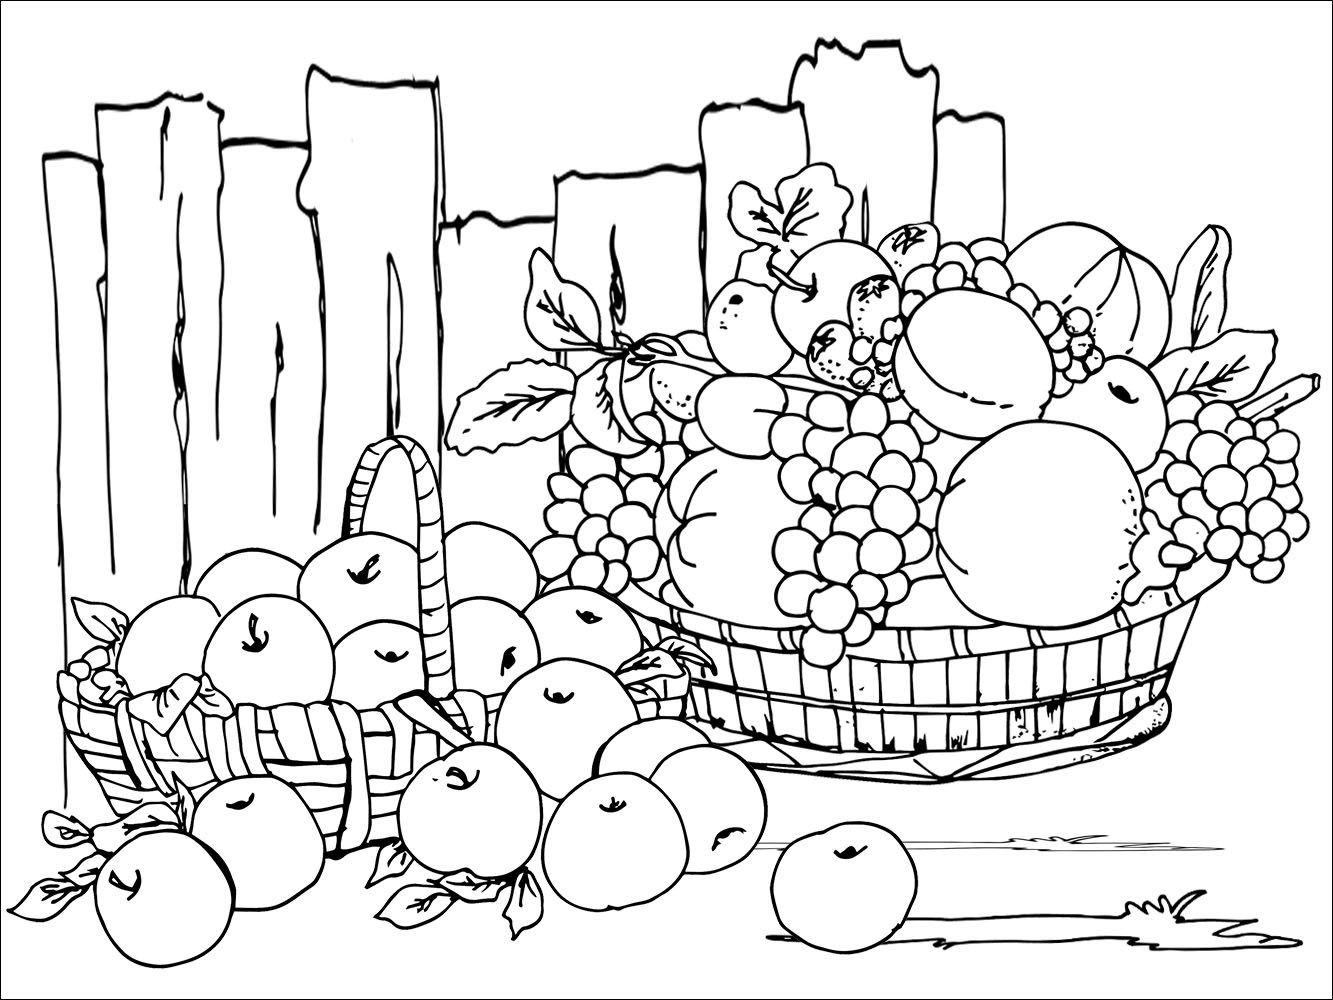 Harvest Festival Printable Colouring Sheet - Free Coloring Pages ...